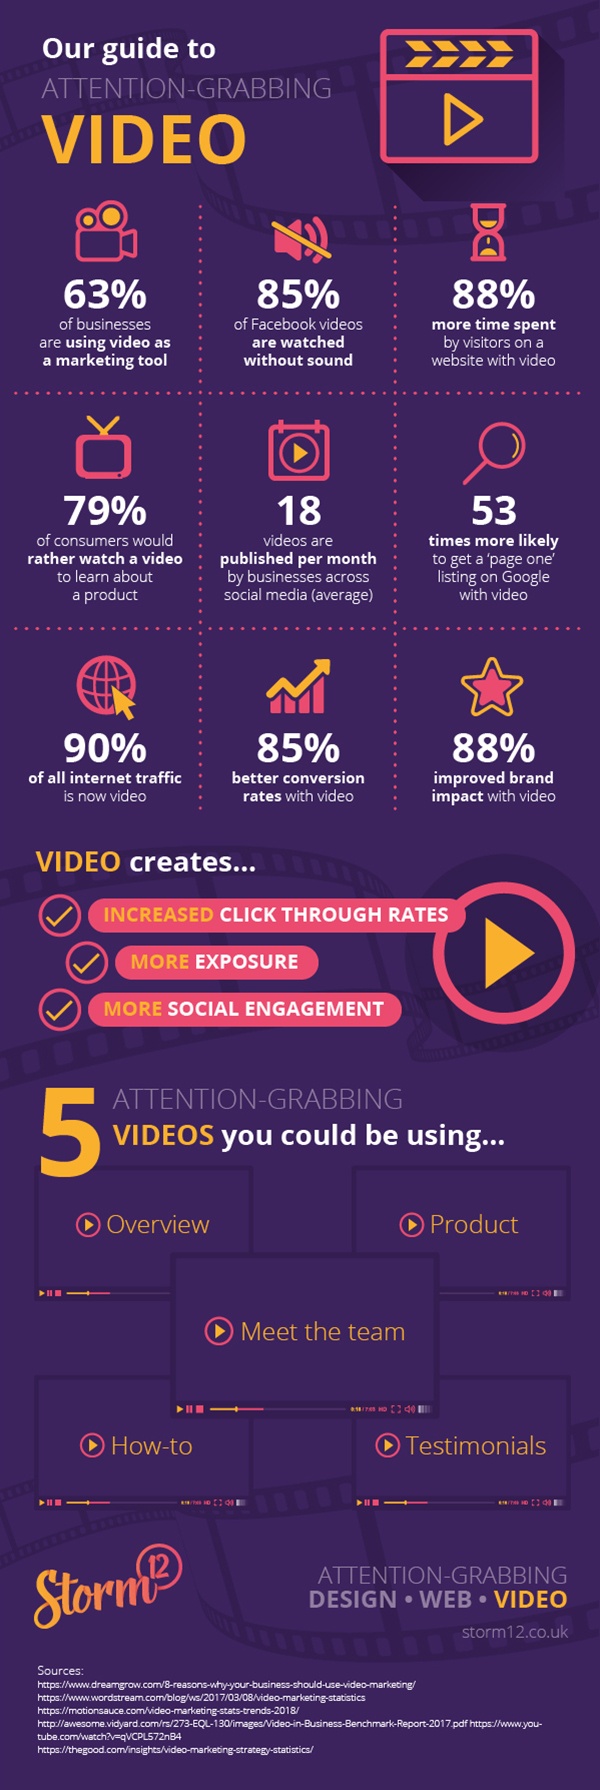 videostats2018infographic_1790